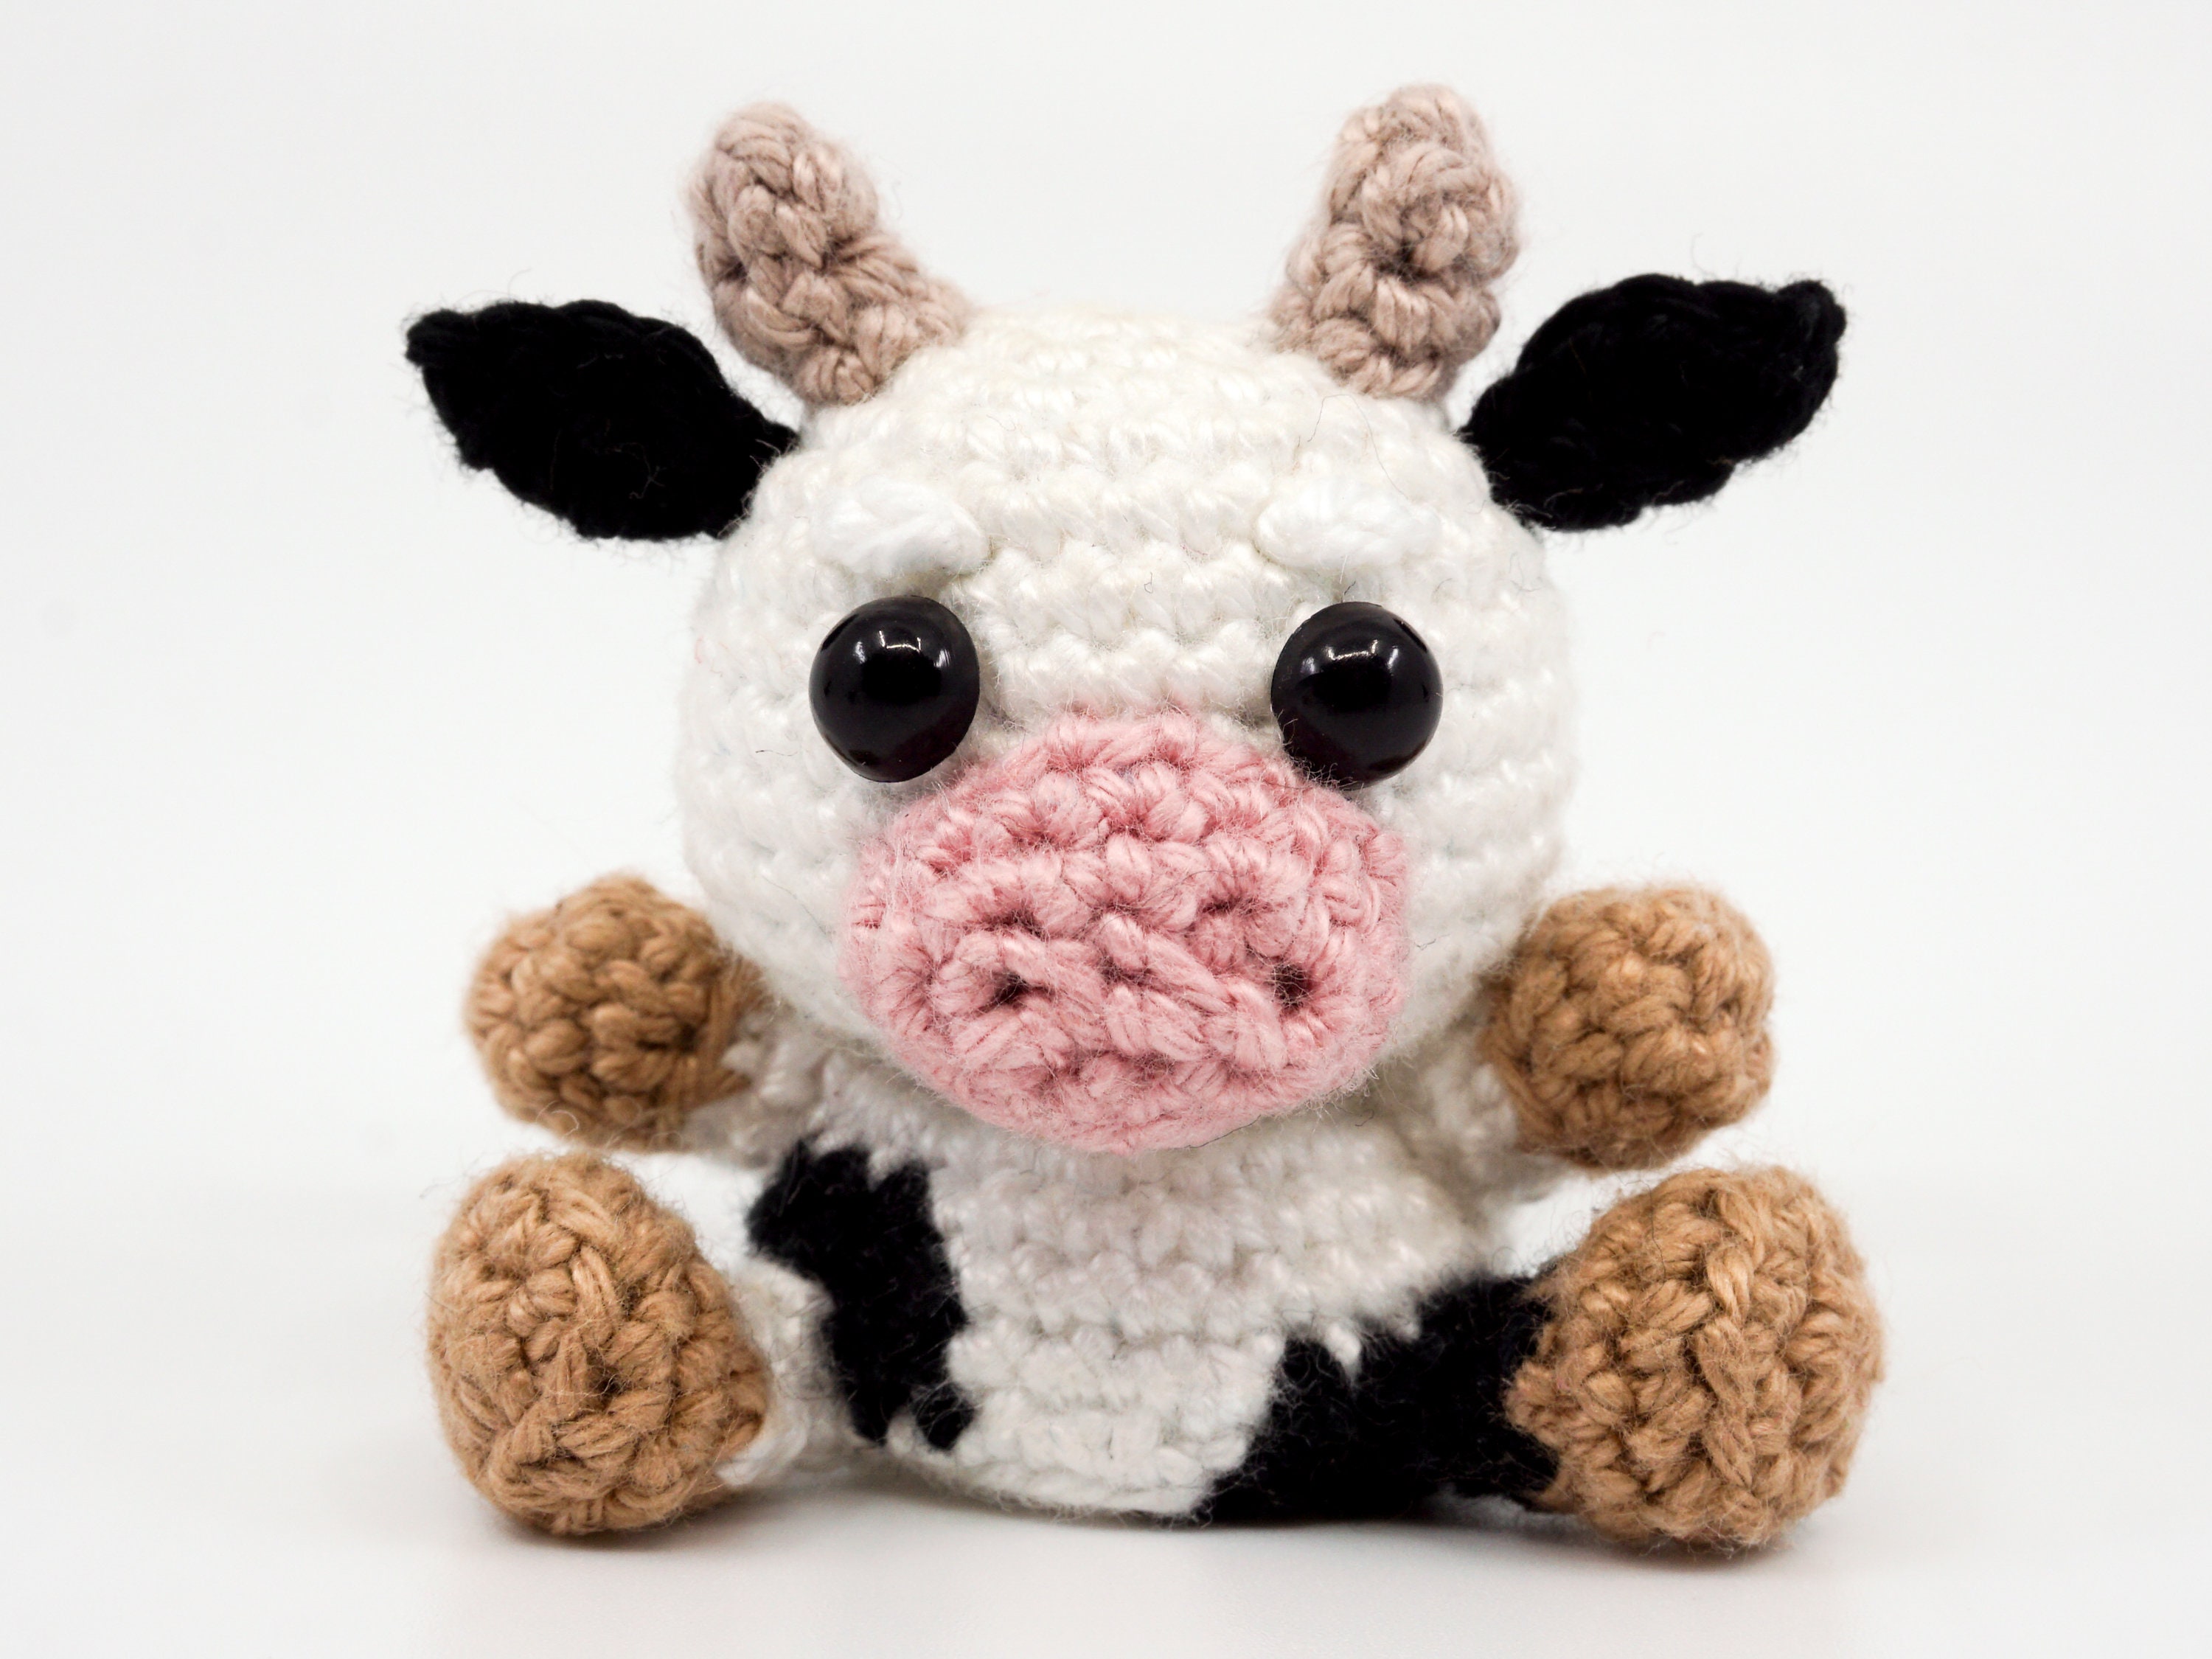 Cow Crochet Kit. Giant Amigurumi Cow Toy. Bonnie the Cow Crochet Pattern.  Advanced Crochet Kit by Wool Couture 